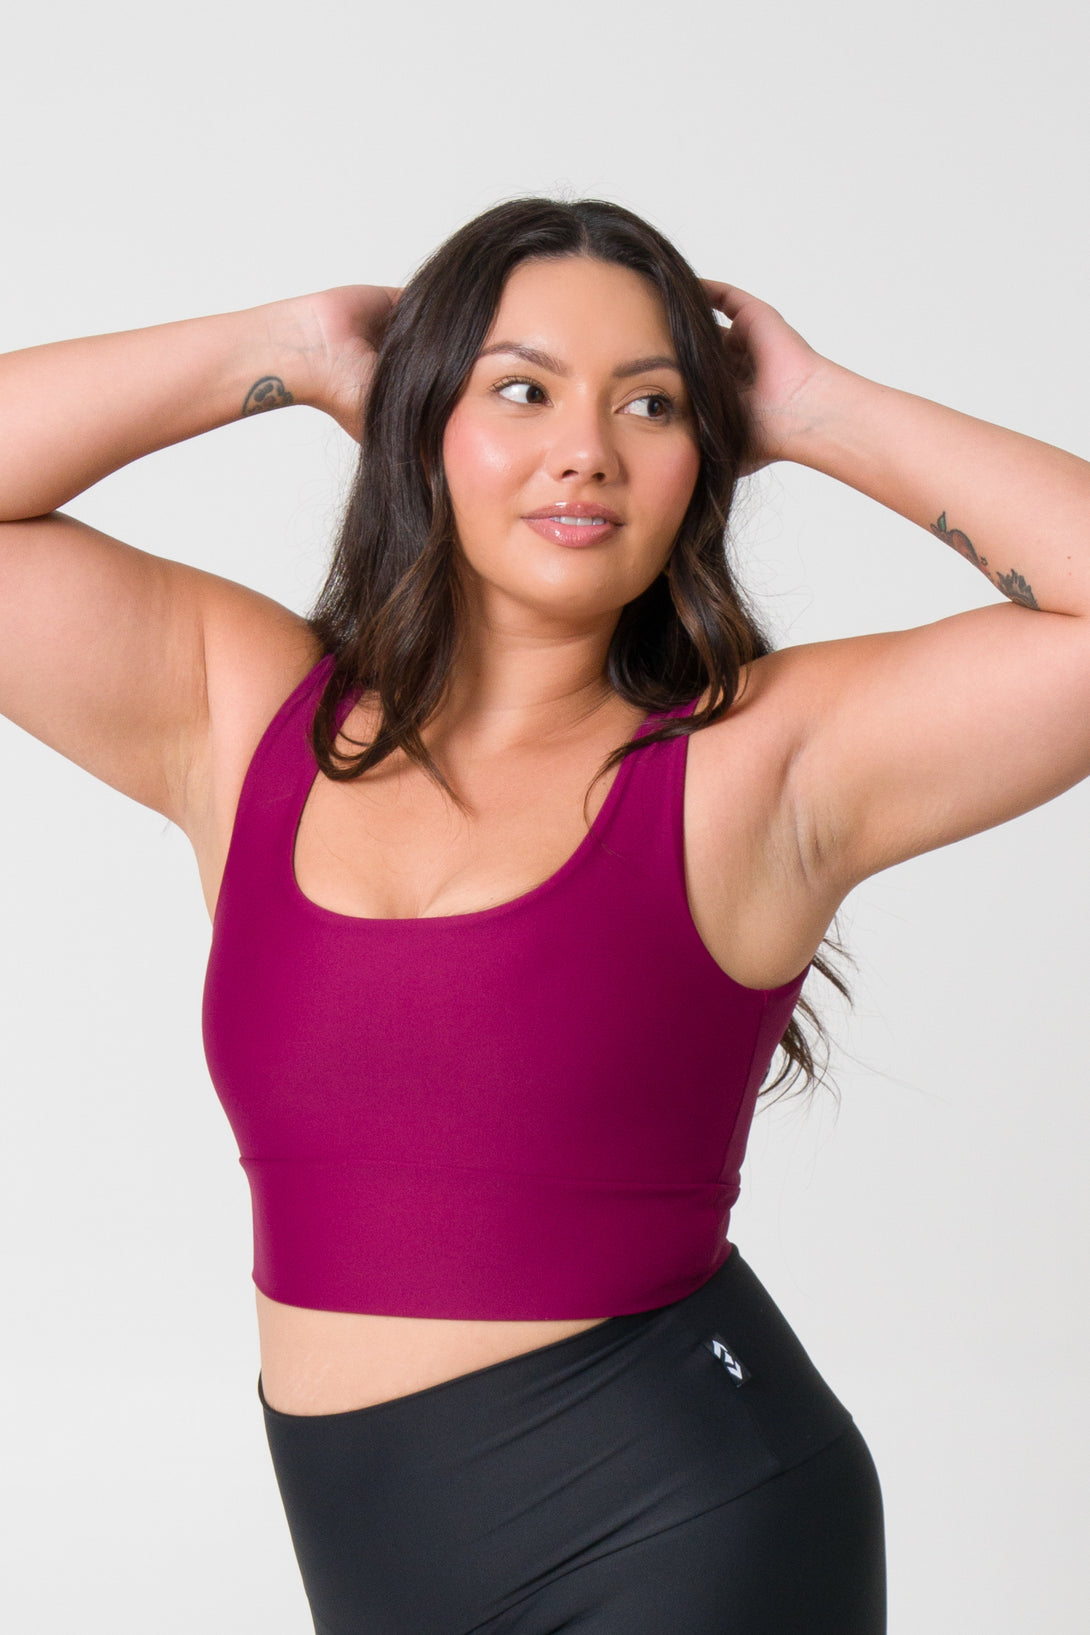 Berry scoop neck comfort crop top, offering both comfort and style for active women during workouts or casual wear."